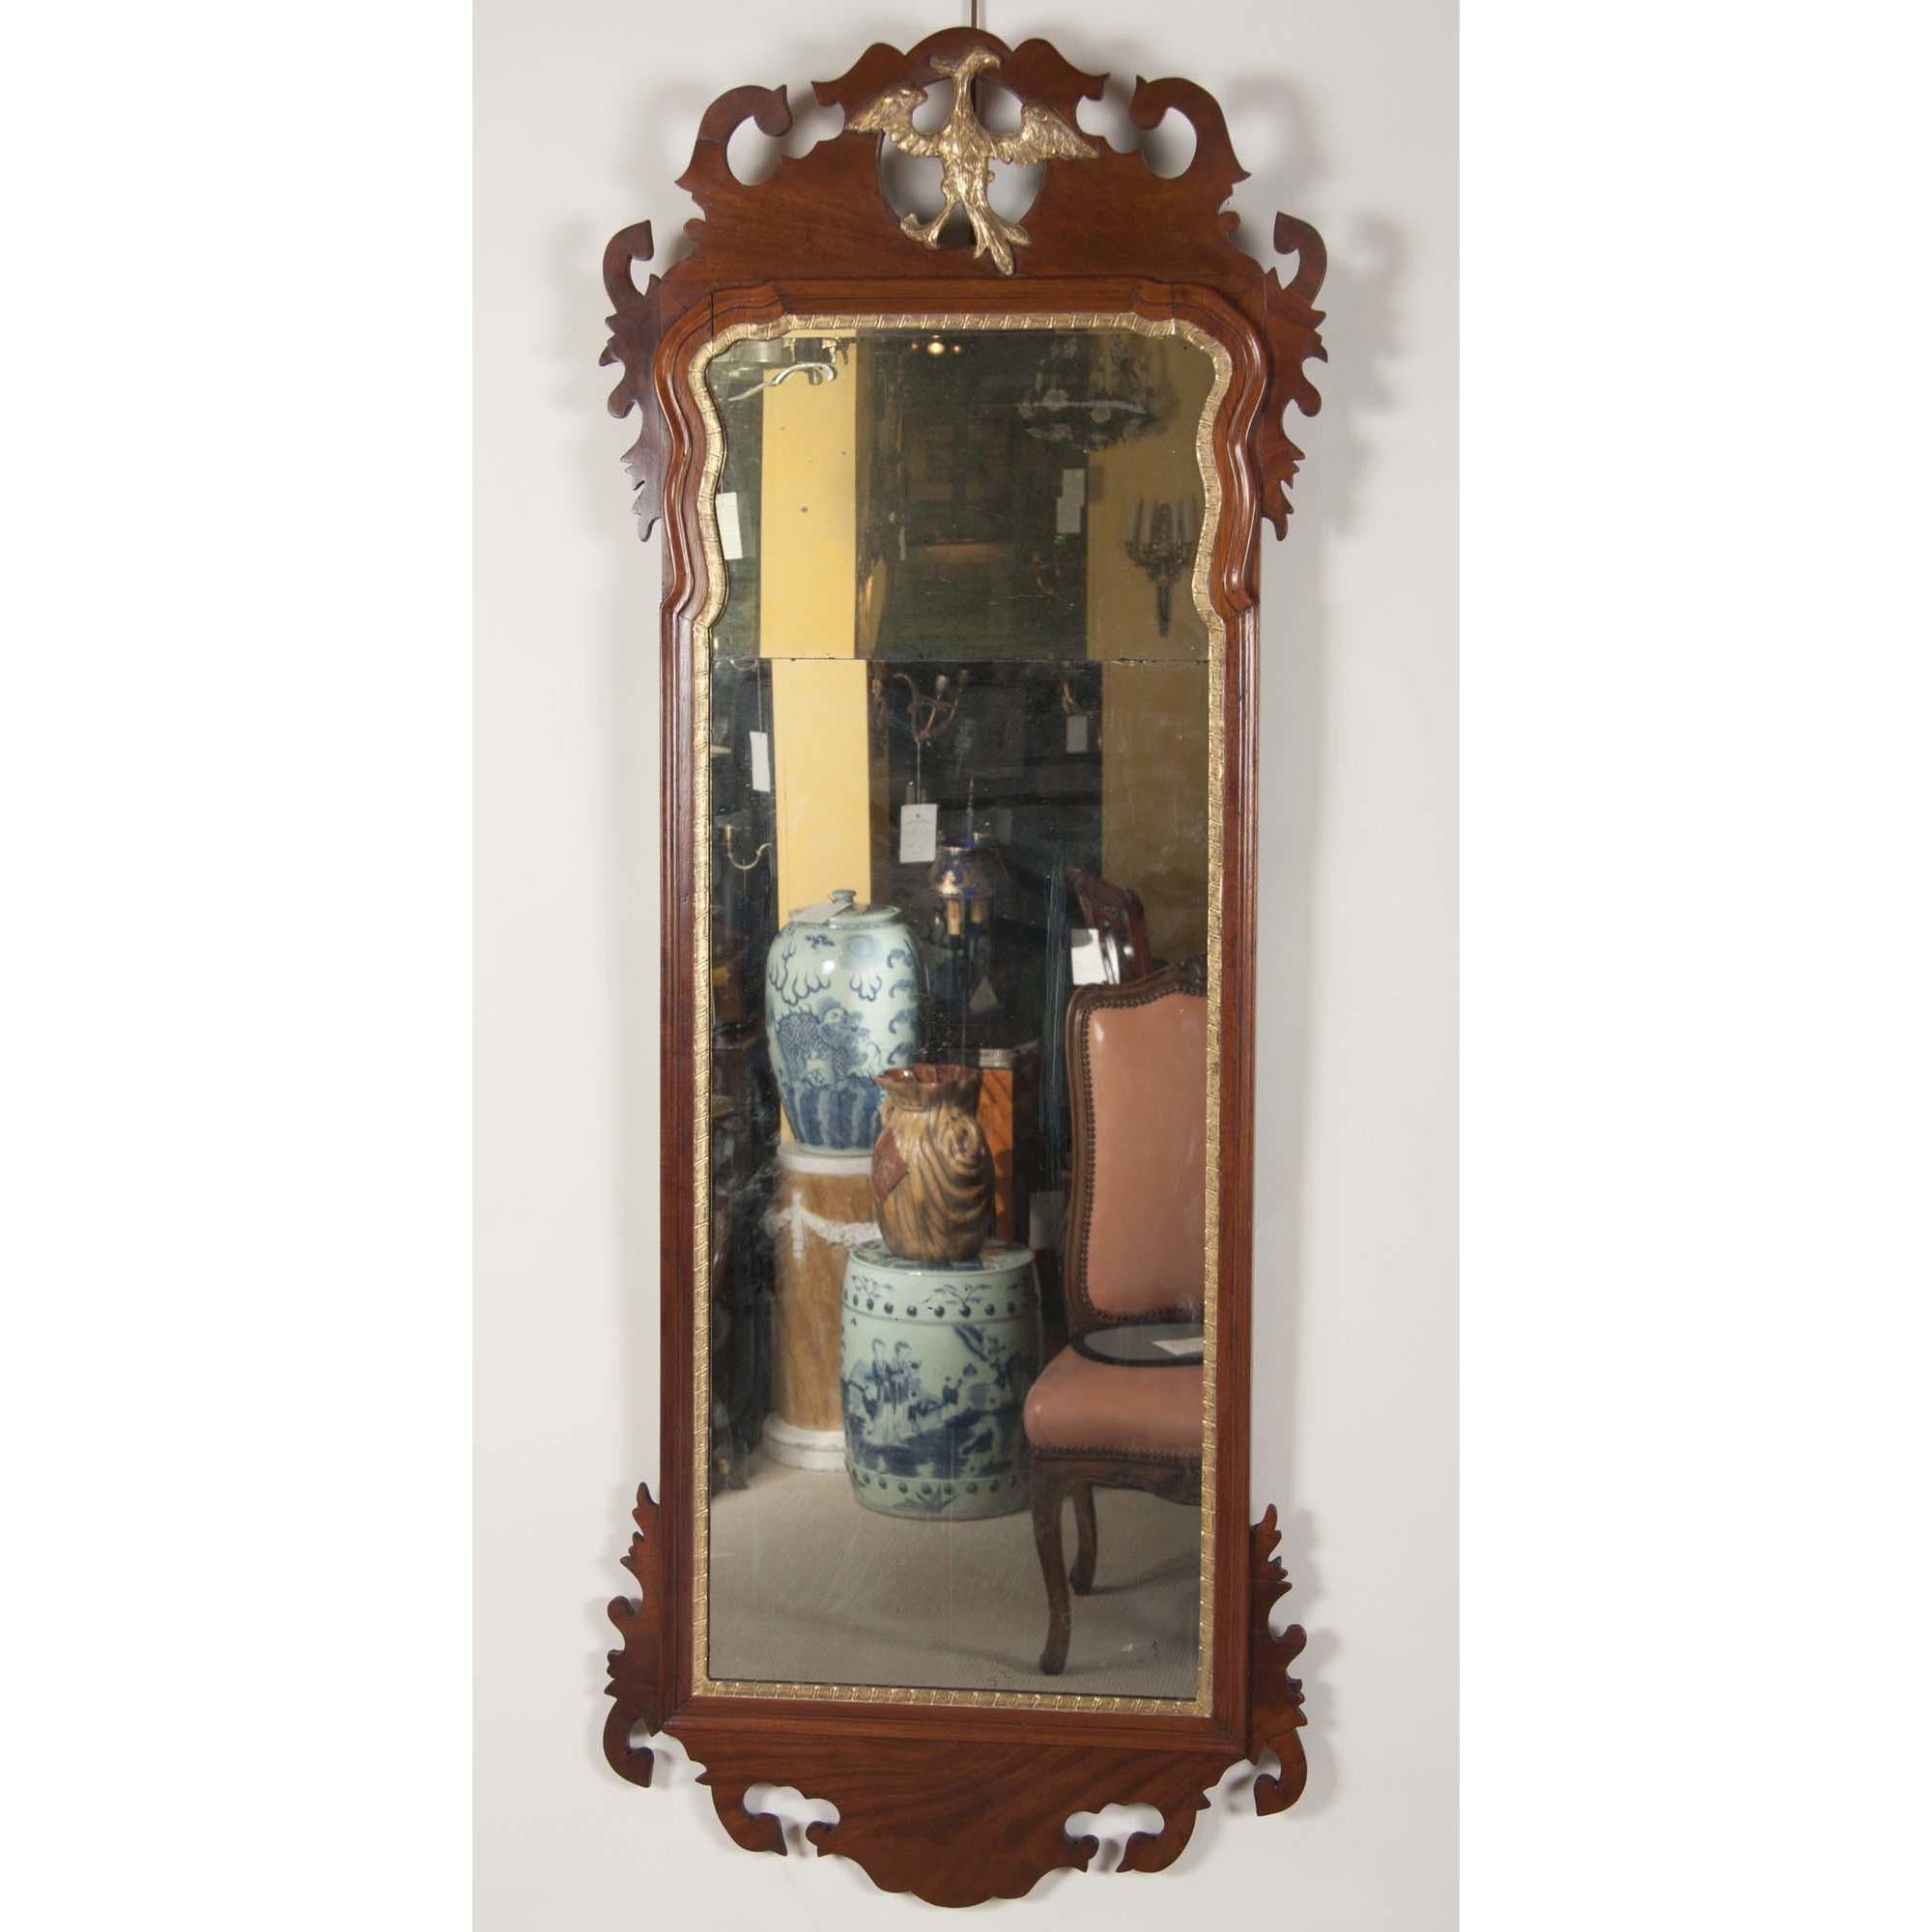 A mahogany Queen Anne pier mirror with carved gilt Phoenix crest, carved shaped and molded frames, and an incused gesso interior border.